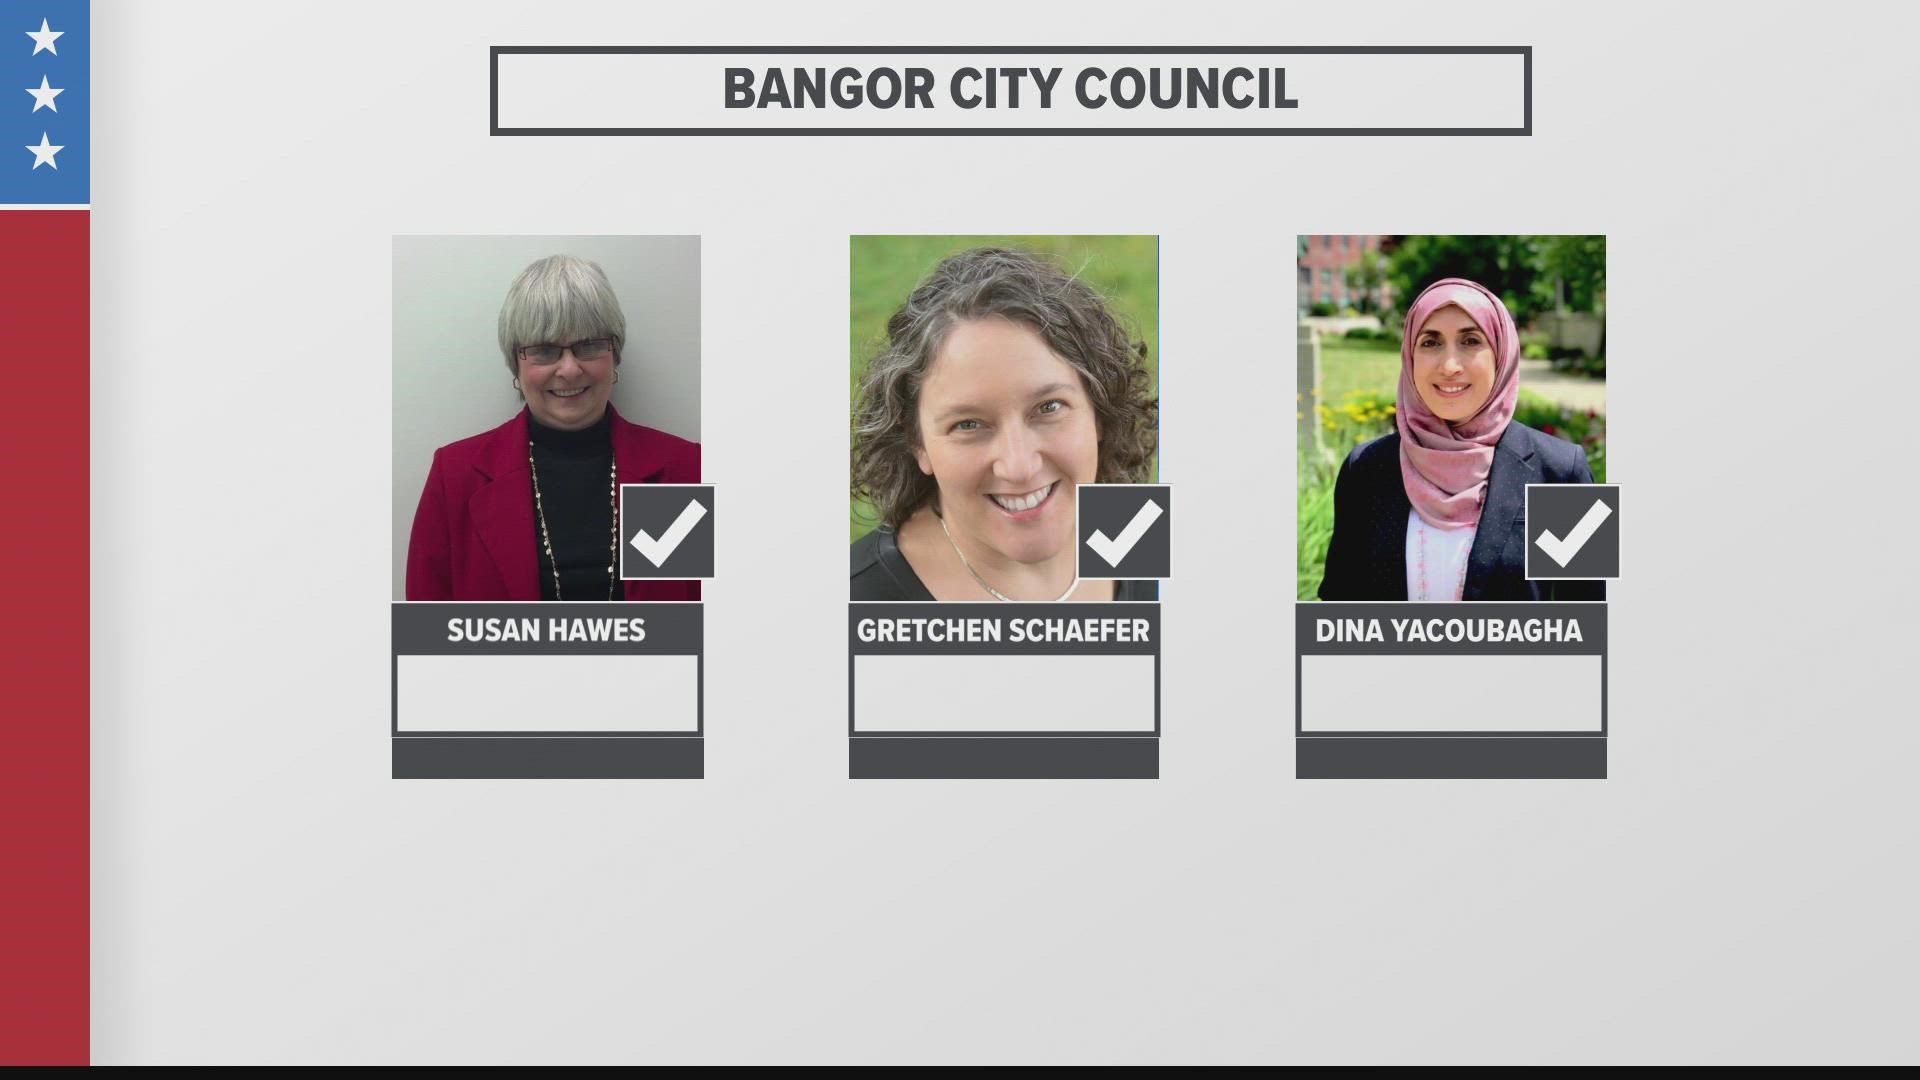 Bangor's official results were announced shortly after 10 p.m. Tuesday